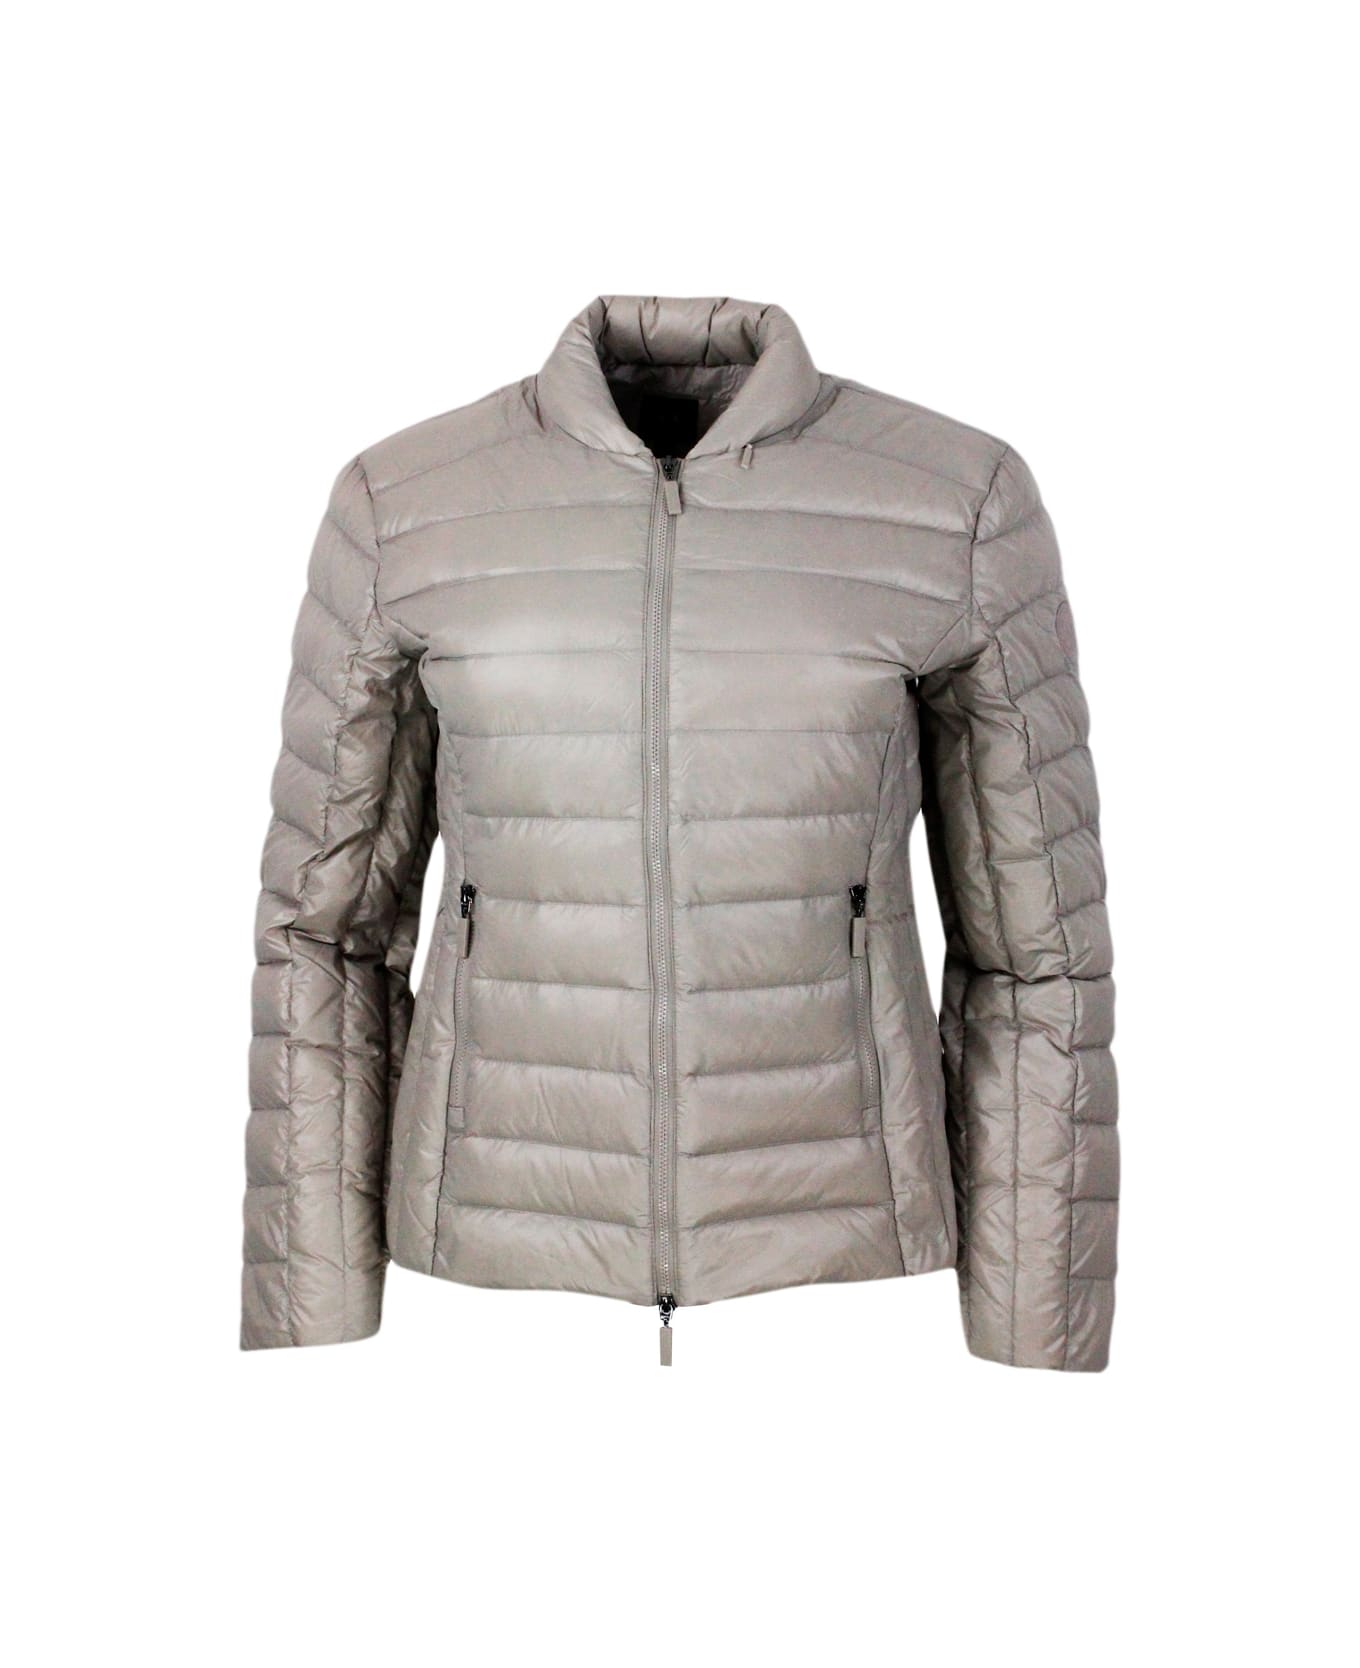 Armani Collezioni Lightweight 100 Gram Slim Down Jacket With Integrated Concealed Hood And Zip Closure - Beige ダウンジャケット